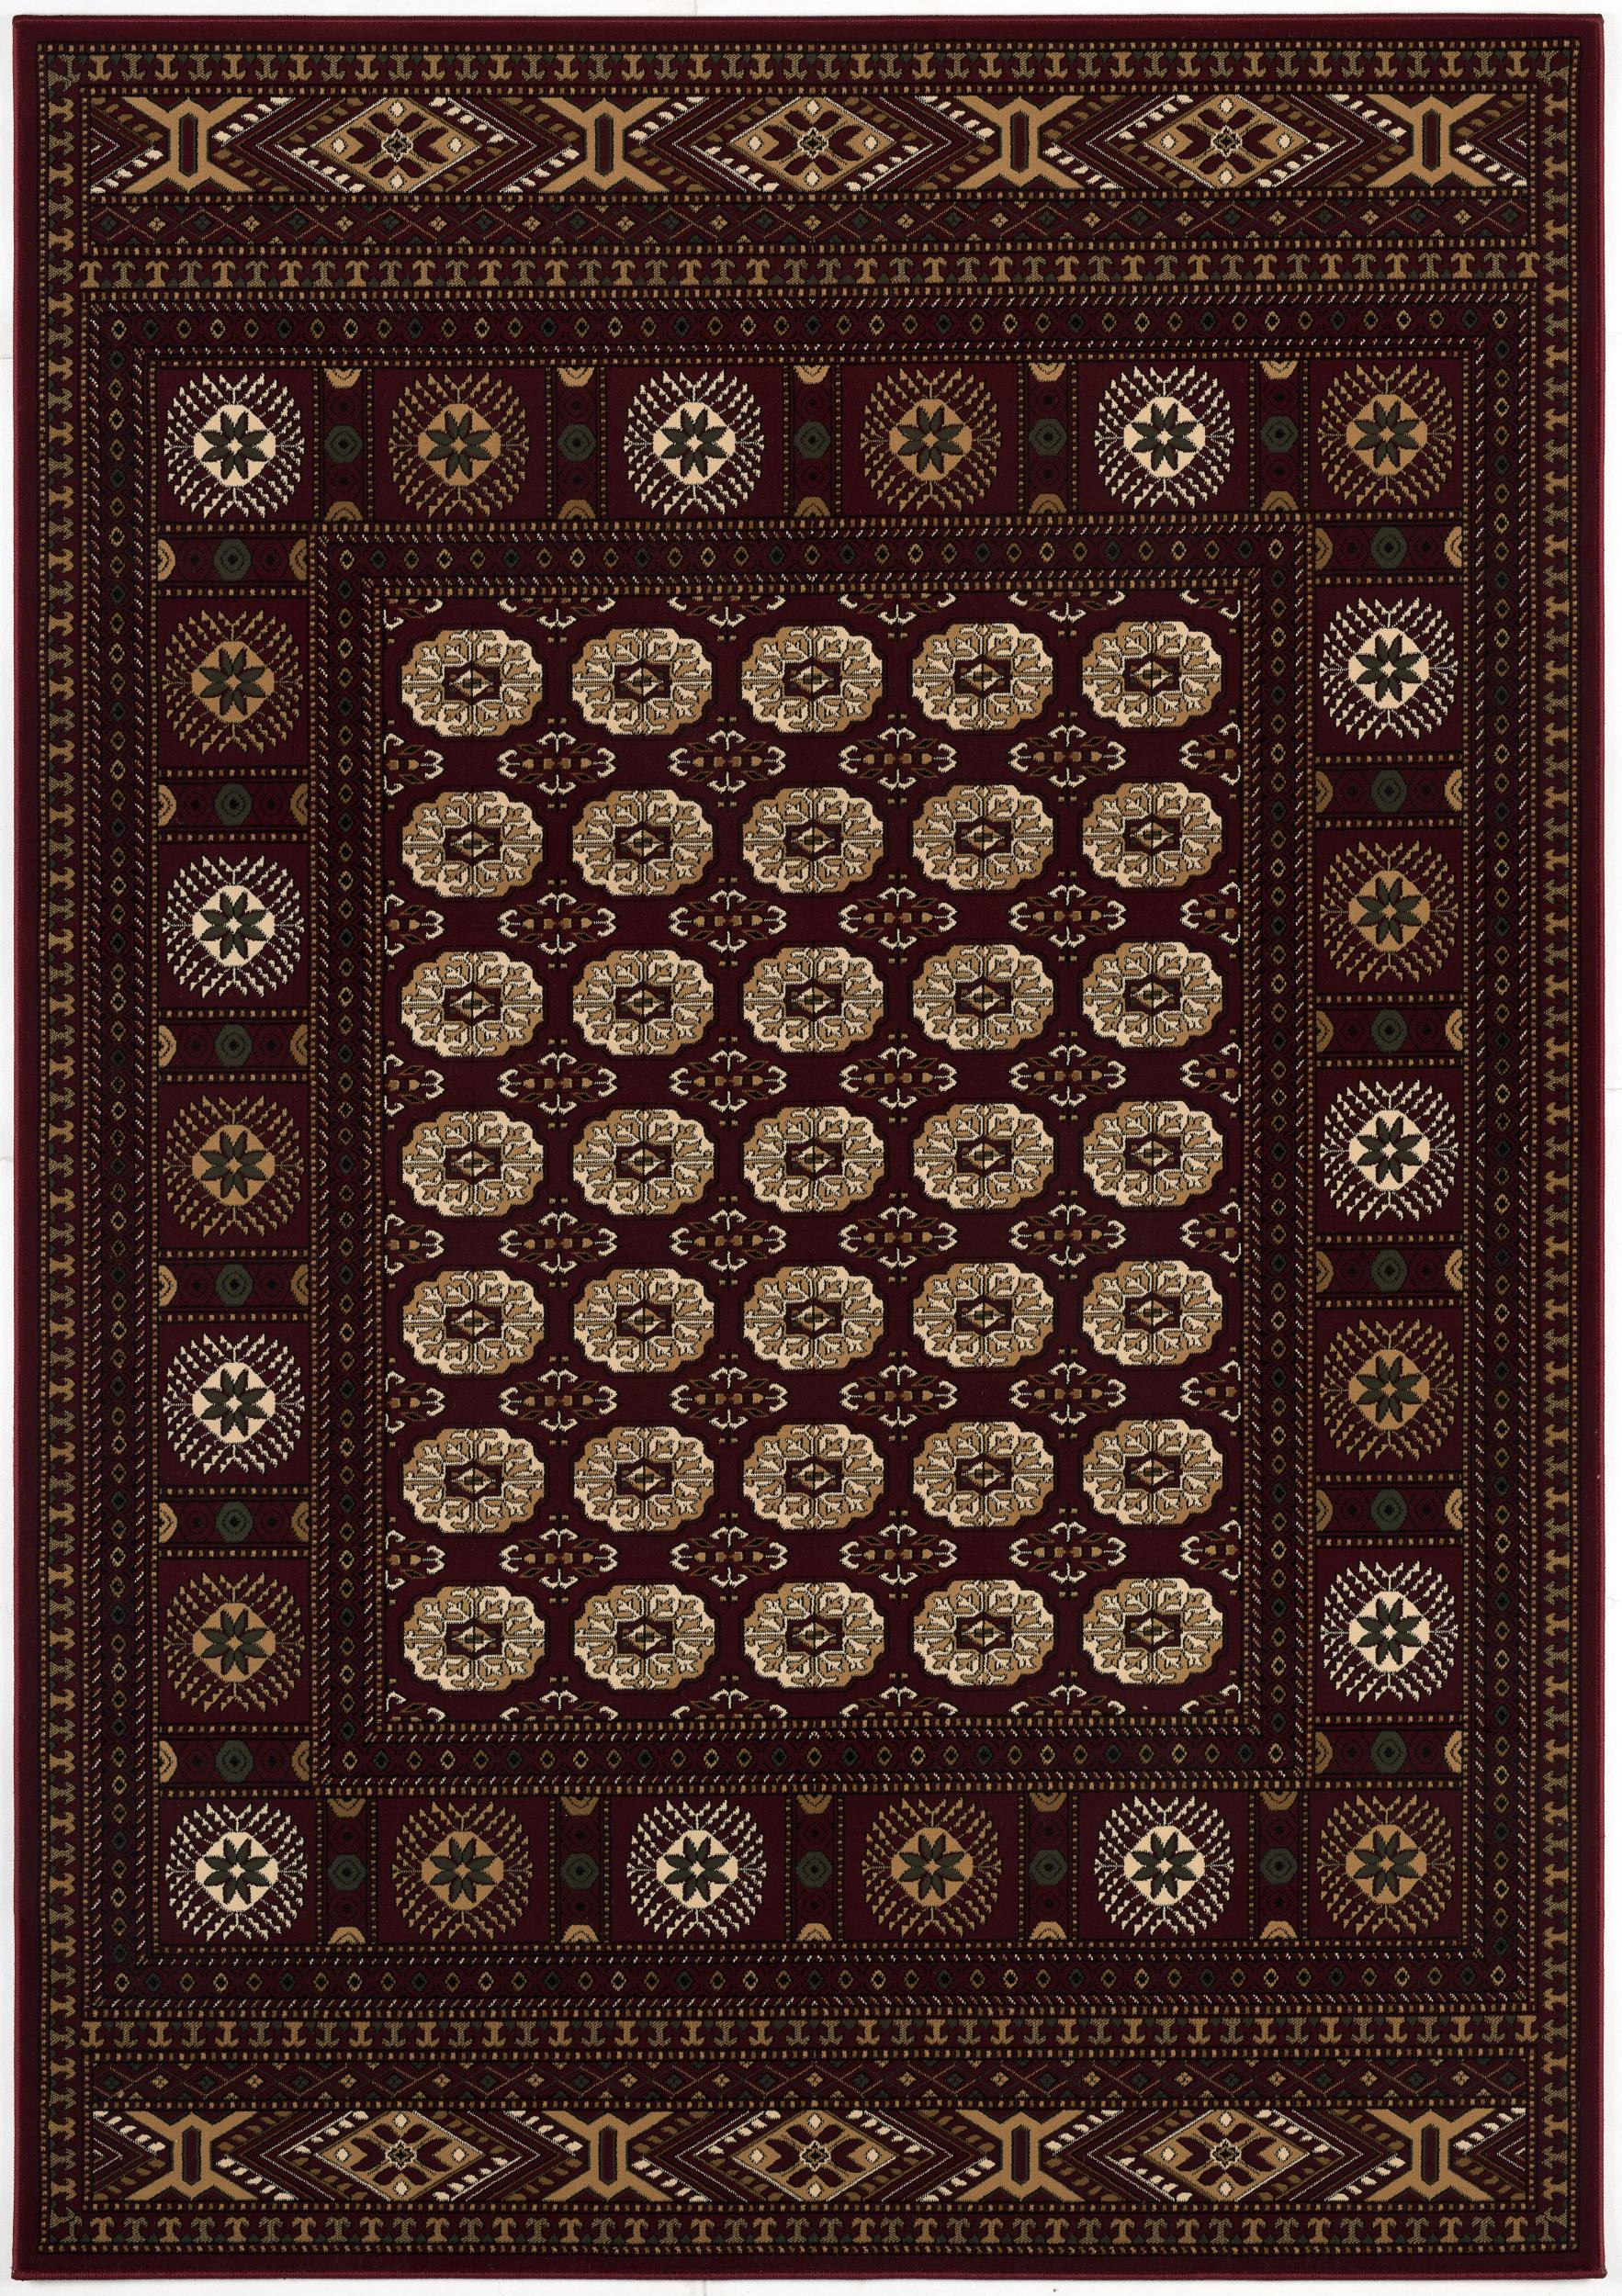 5’ x 8’ Red Eclectic Geometric Pattern Area Rug-395470-1